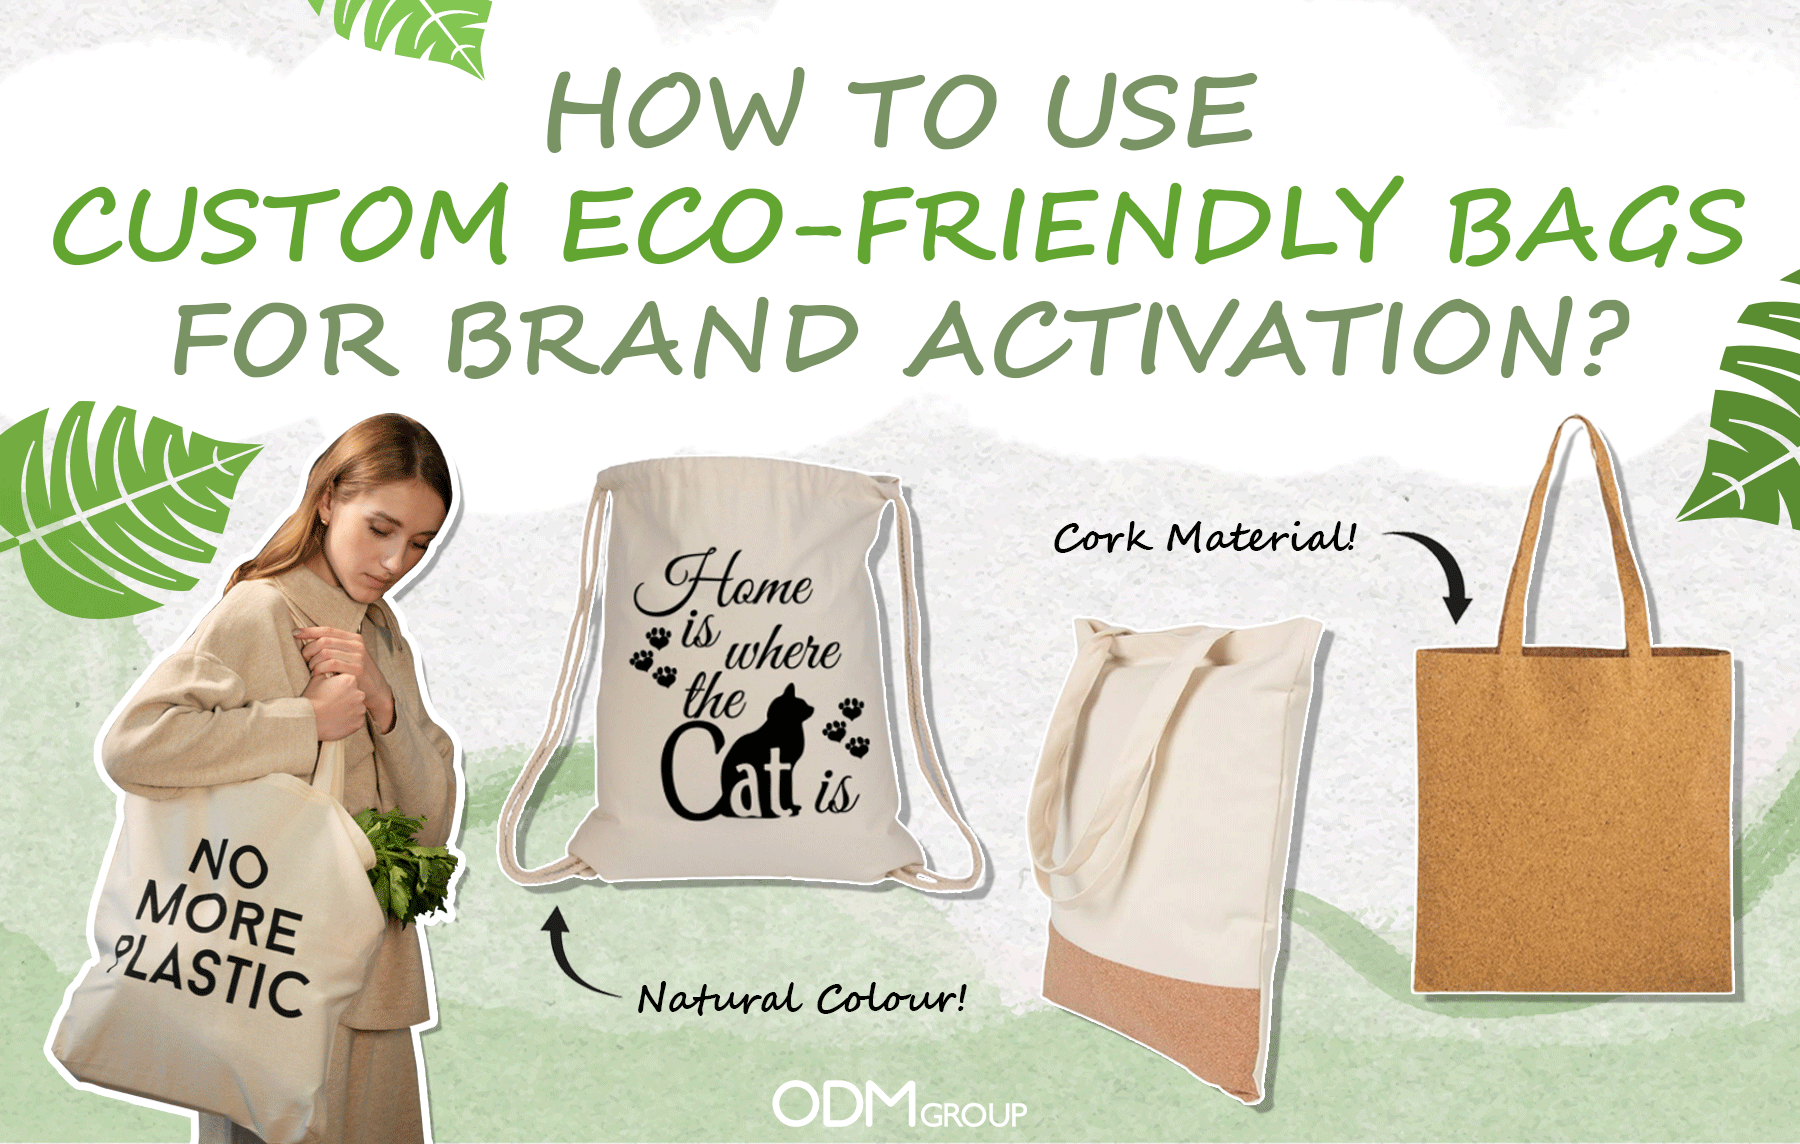 Promote Environmental and Brand Awareness with Custom Reusable